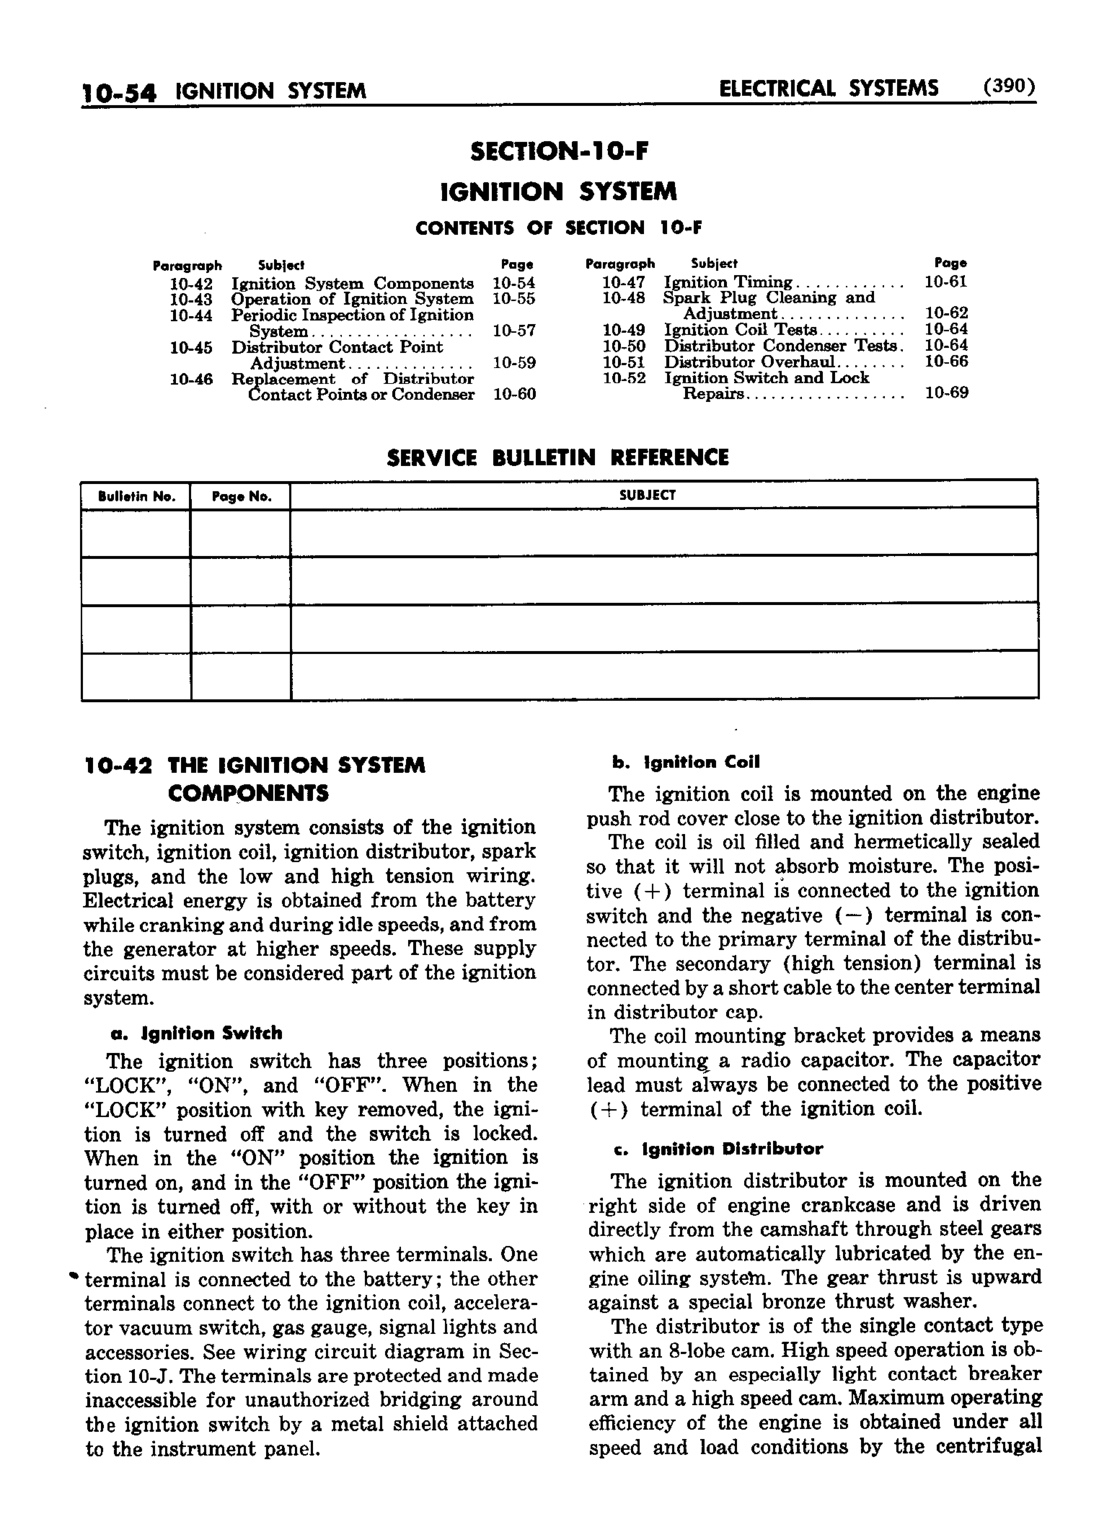 n_11 1952 Buick Shop Manual - Electrical Systems-054-054.jpg